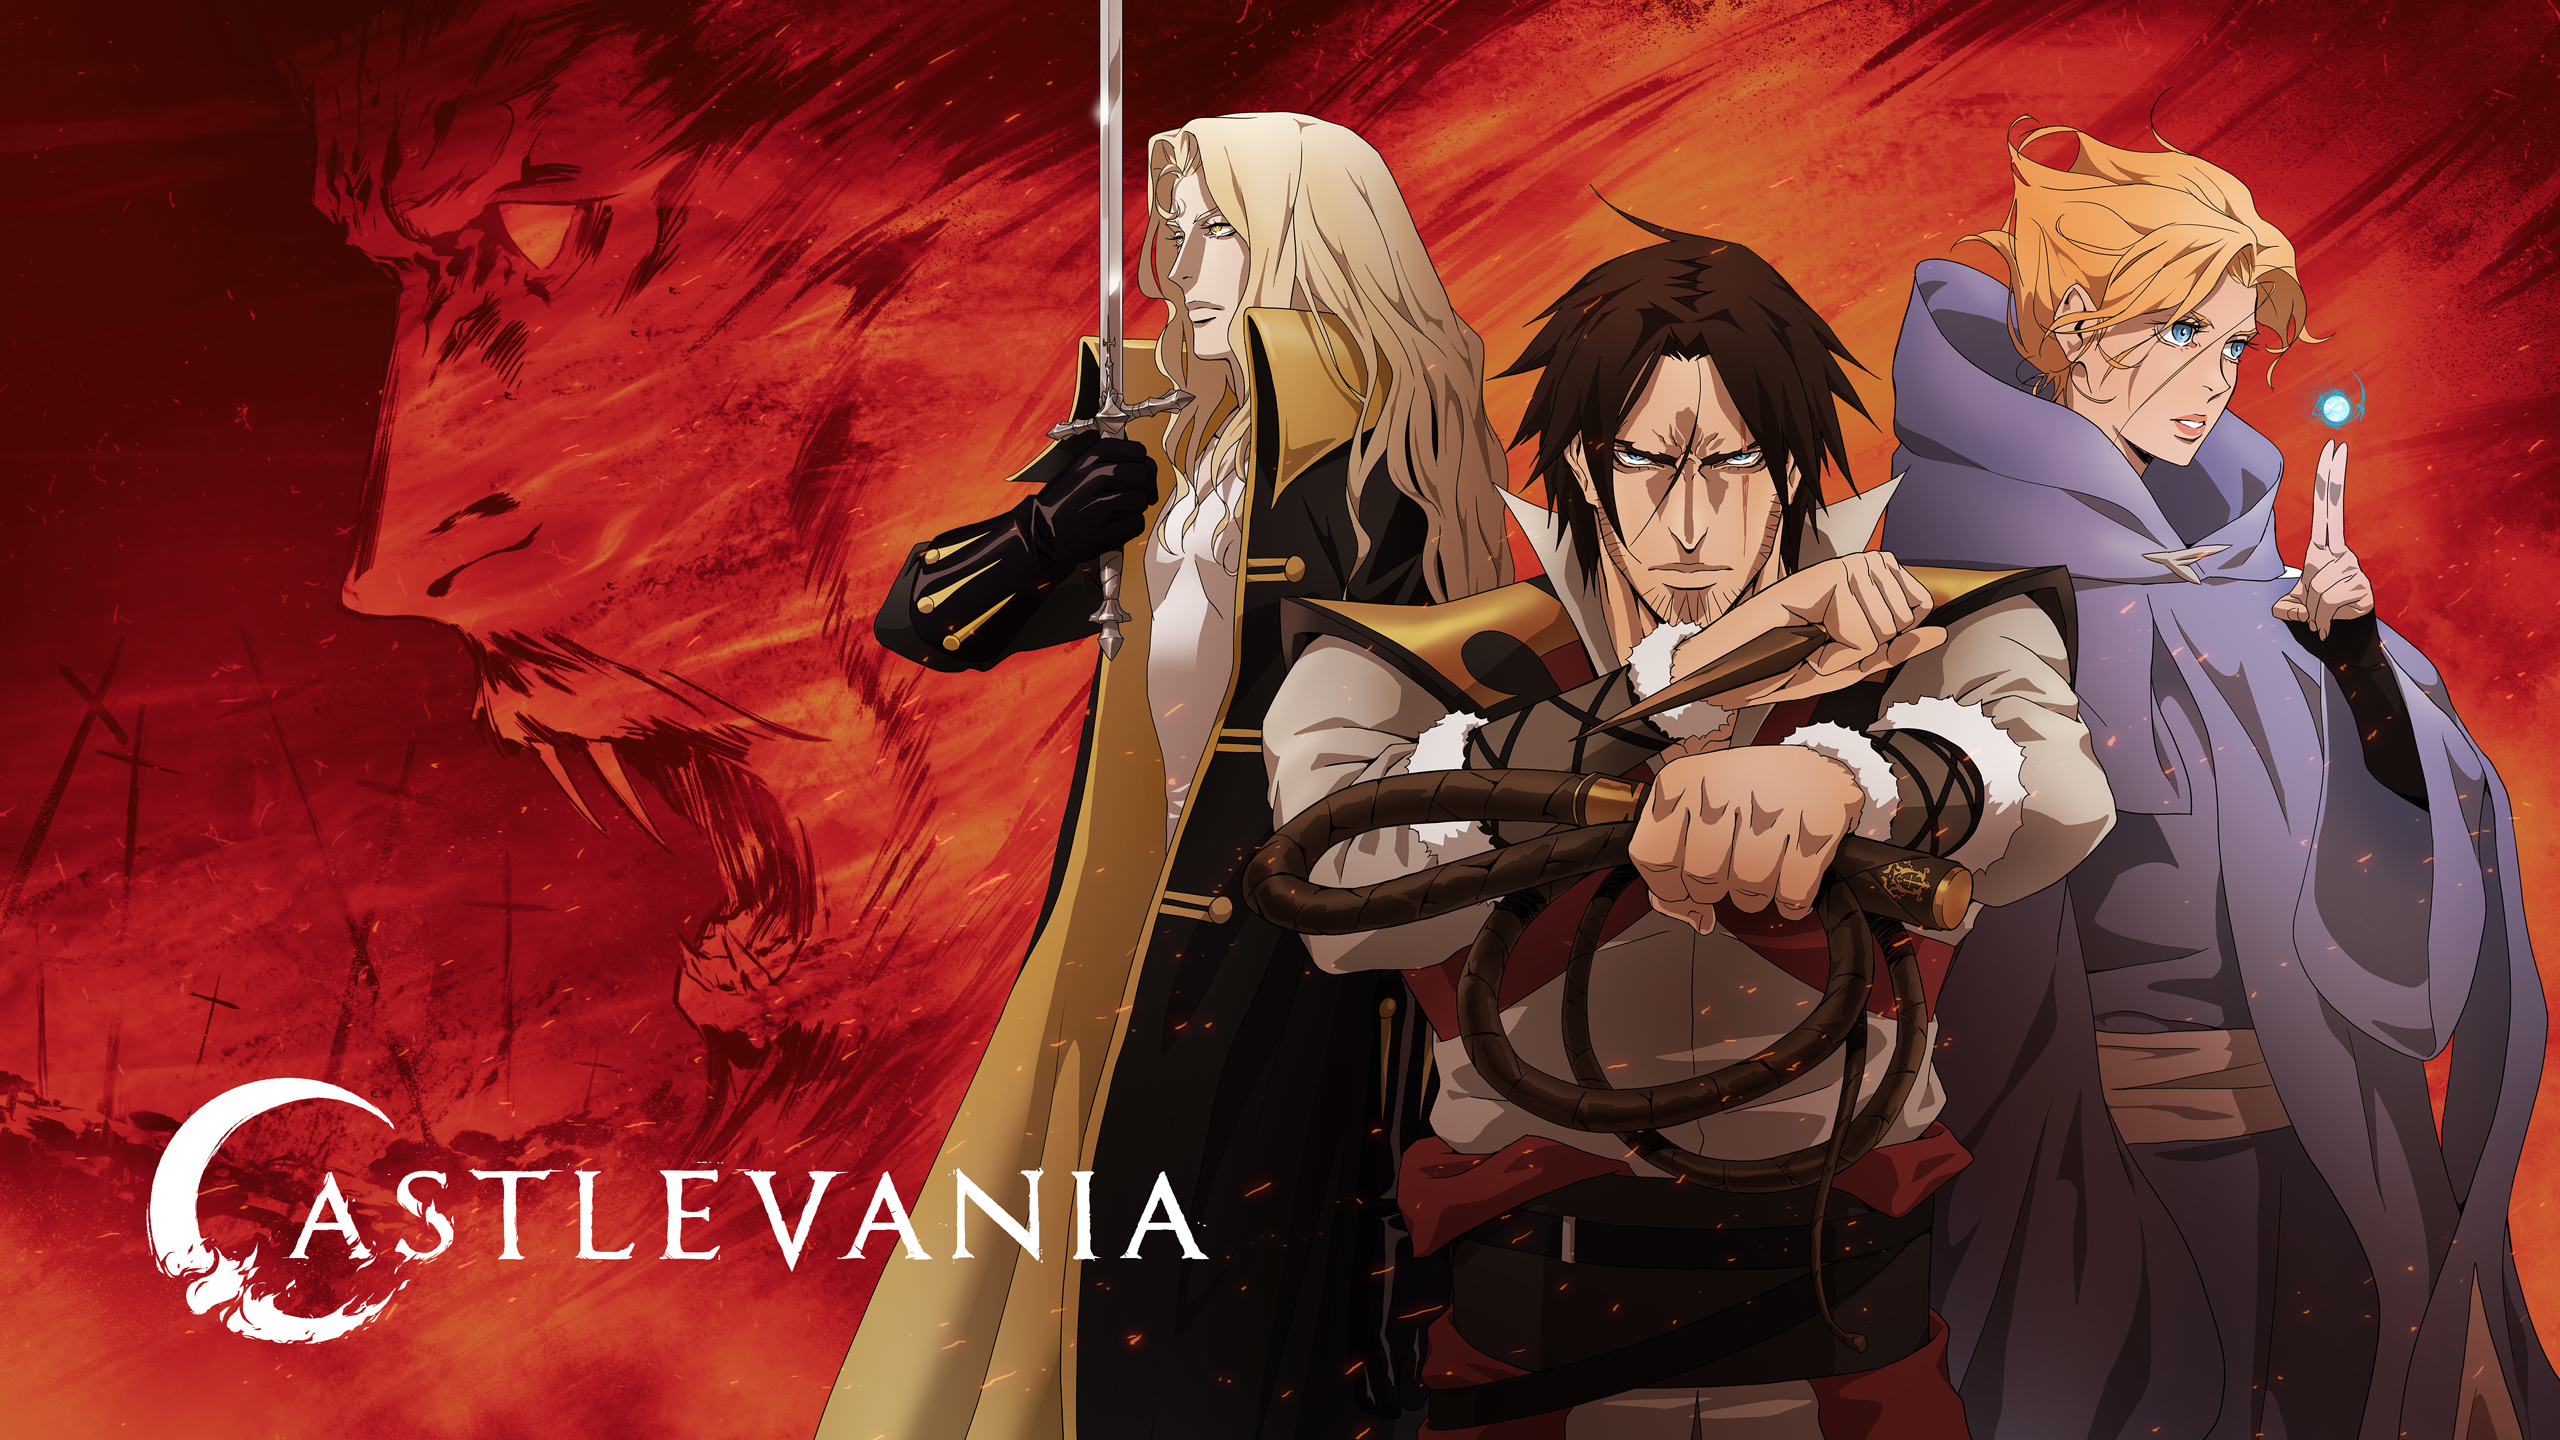 Cast of Castlevania animated series by Samuel Deats